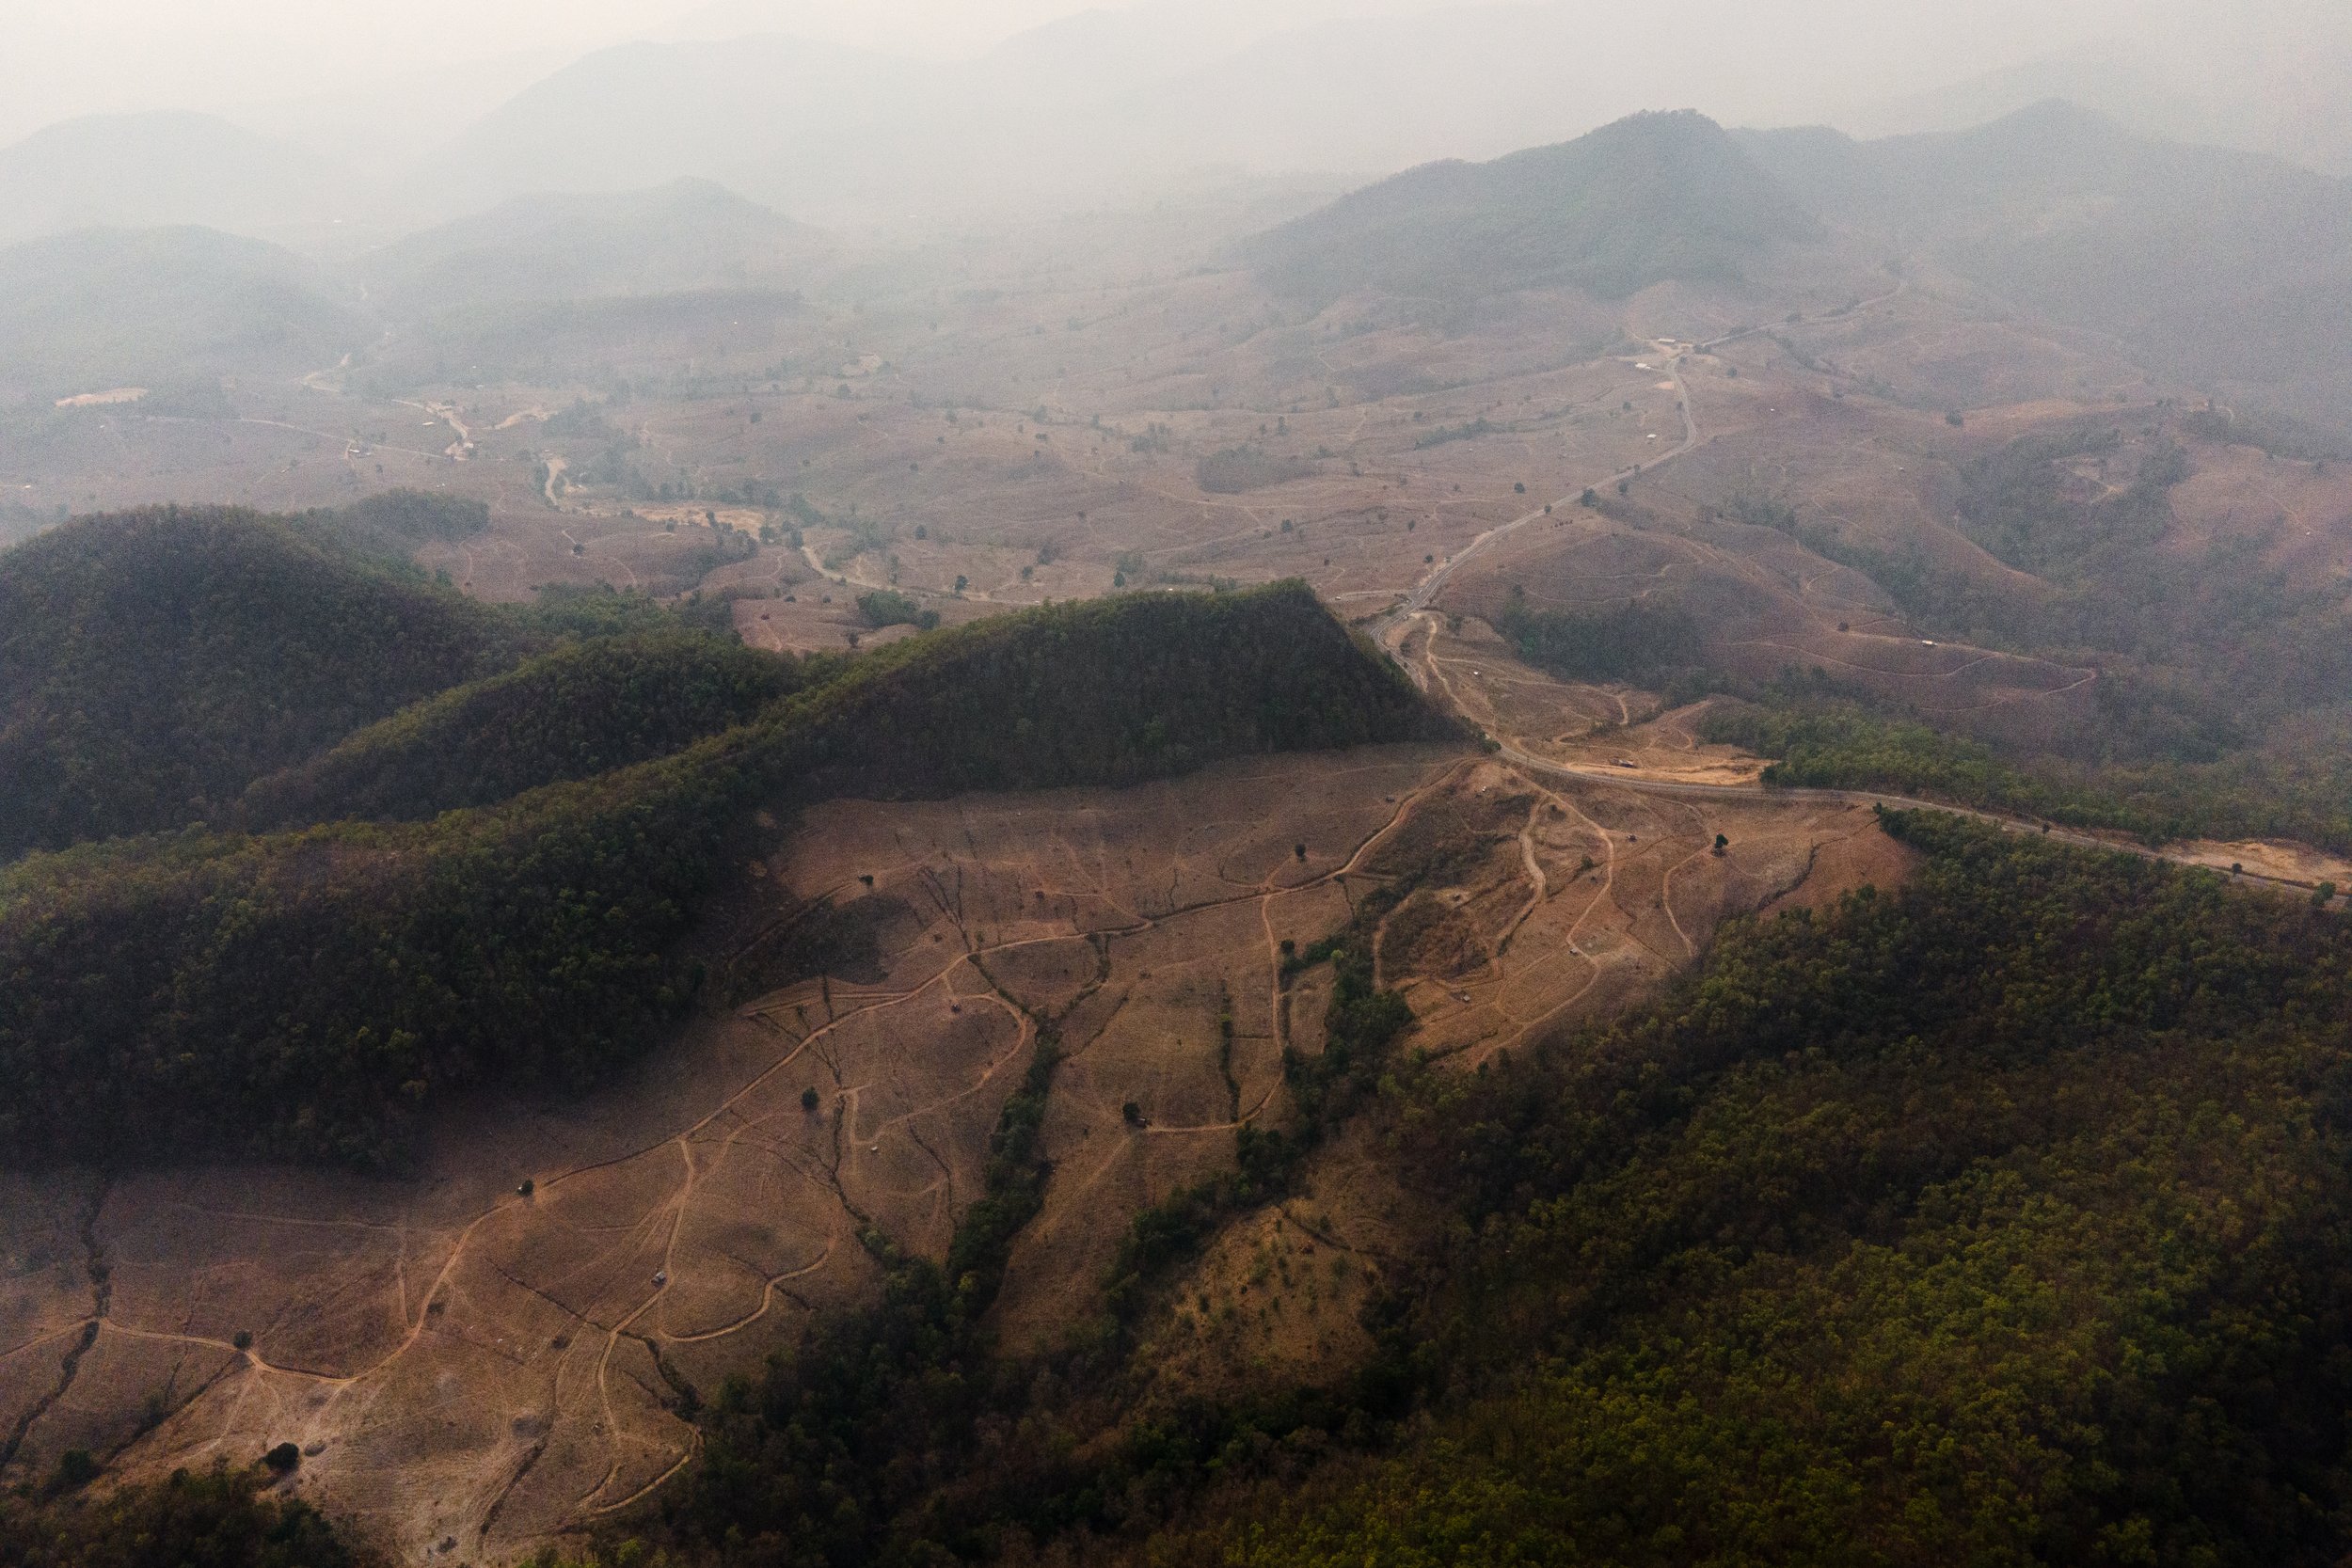  Thailand, Chiang Mai. 12 April 2023. The vast mountain range where corn is grown for animal feed is blanketed in heavy smog after the crop waste was burned to prepare the new plantations. Over the past 20 years, the demand for meat has increased in 